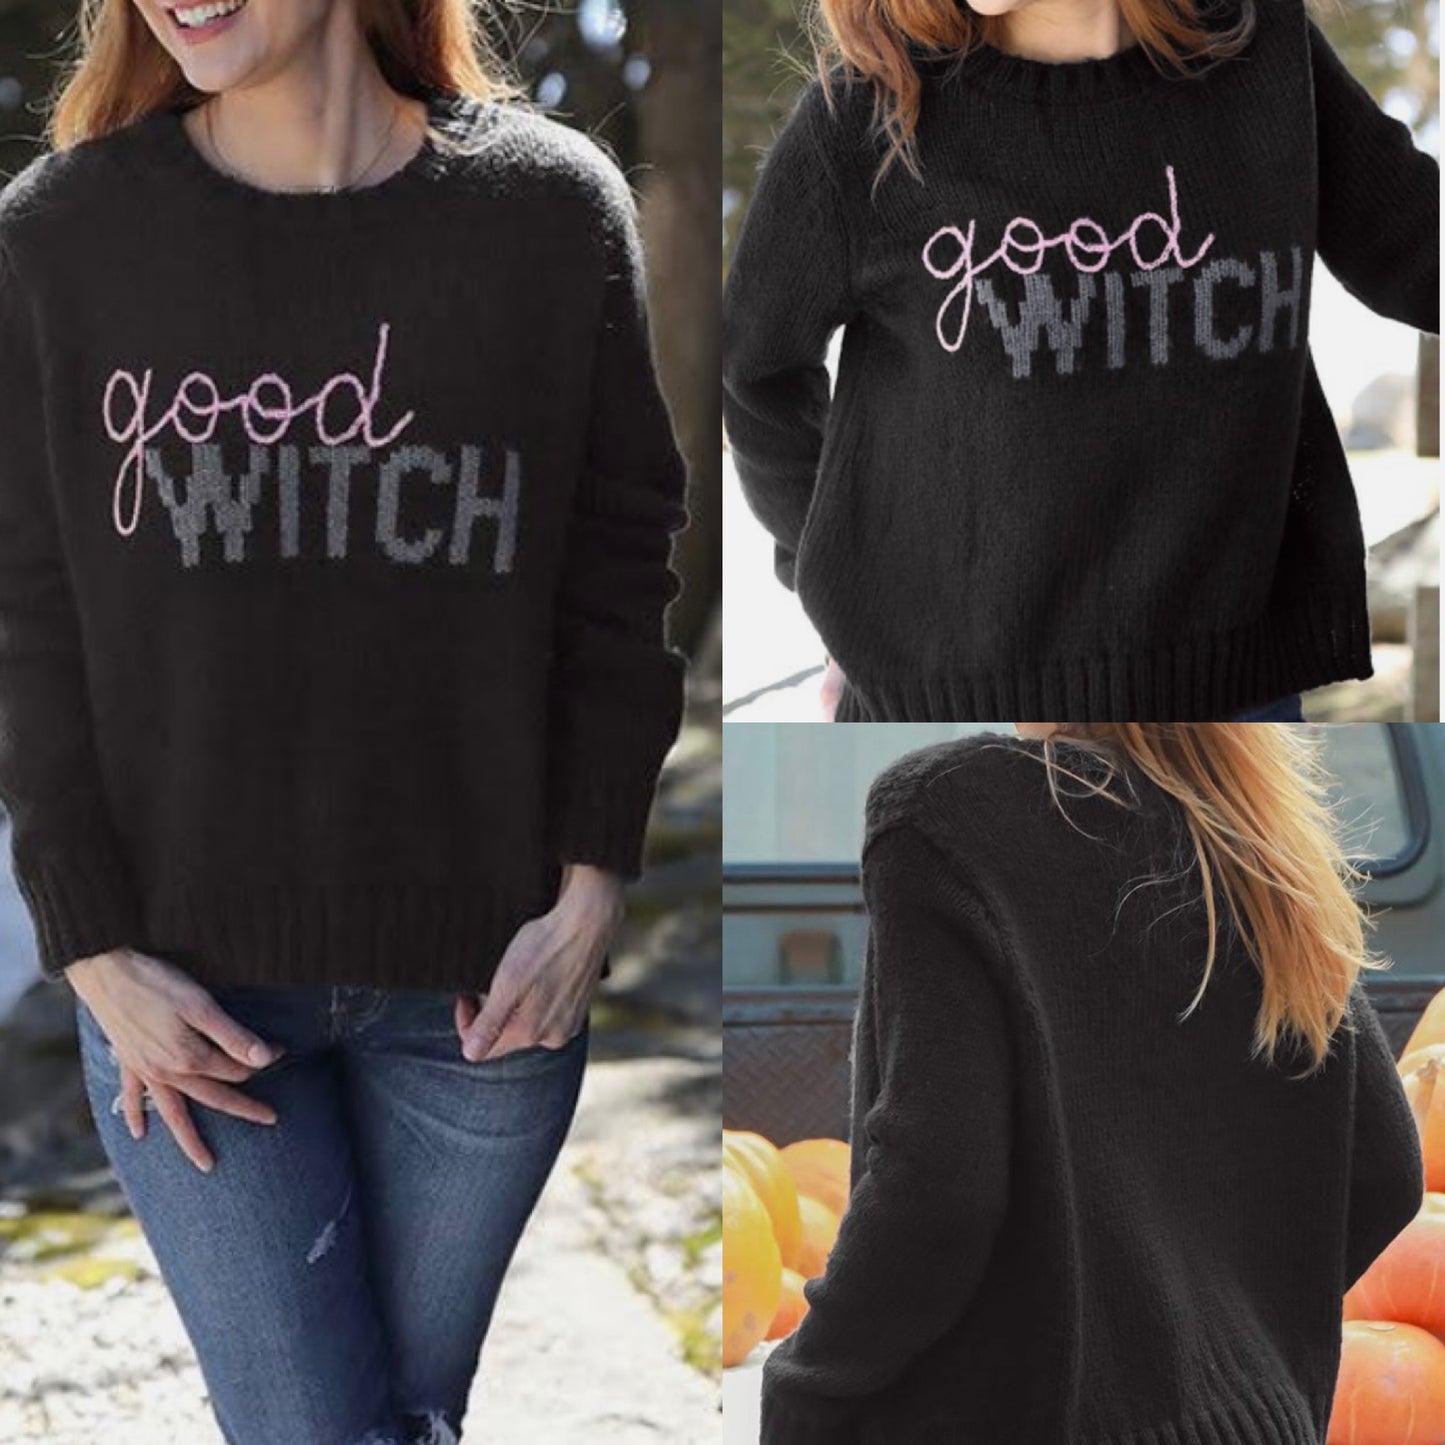 Good Witch/Bad Witch Sweaters